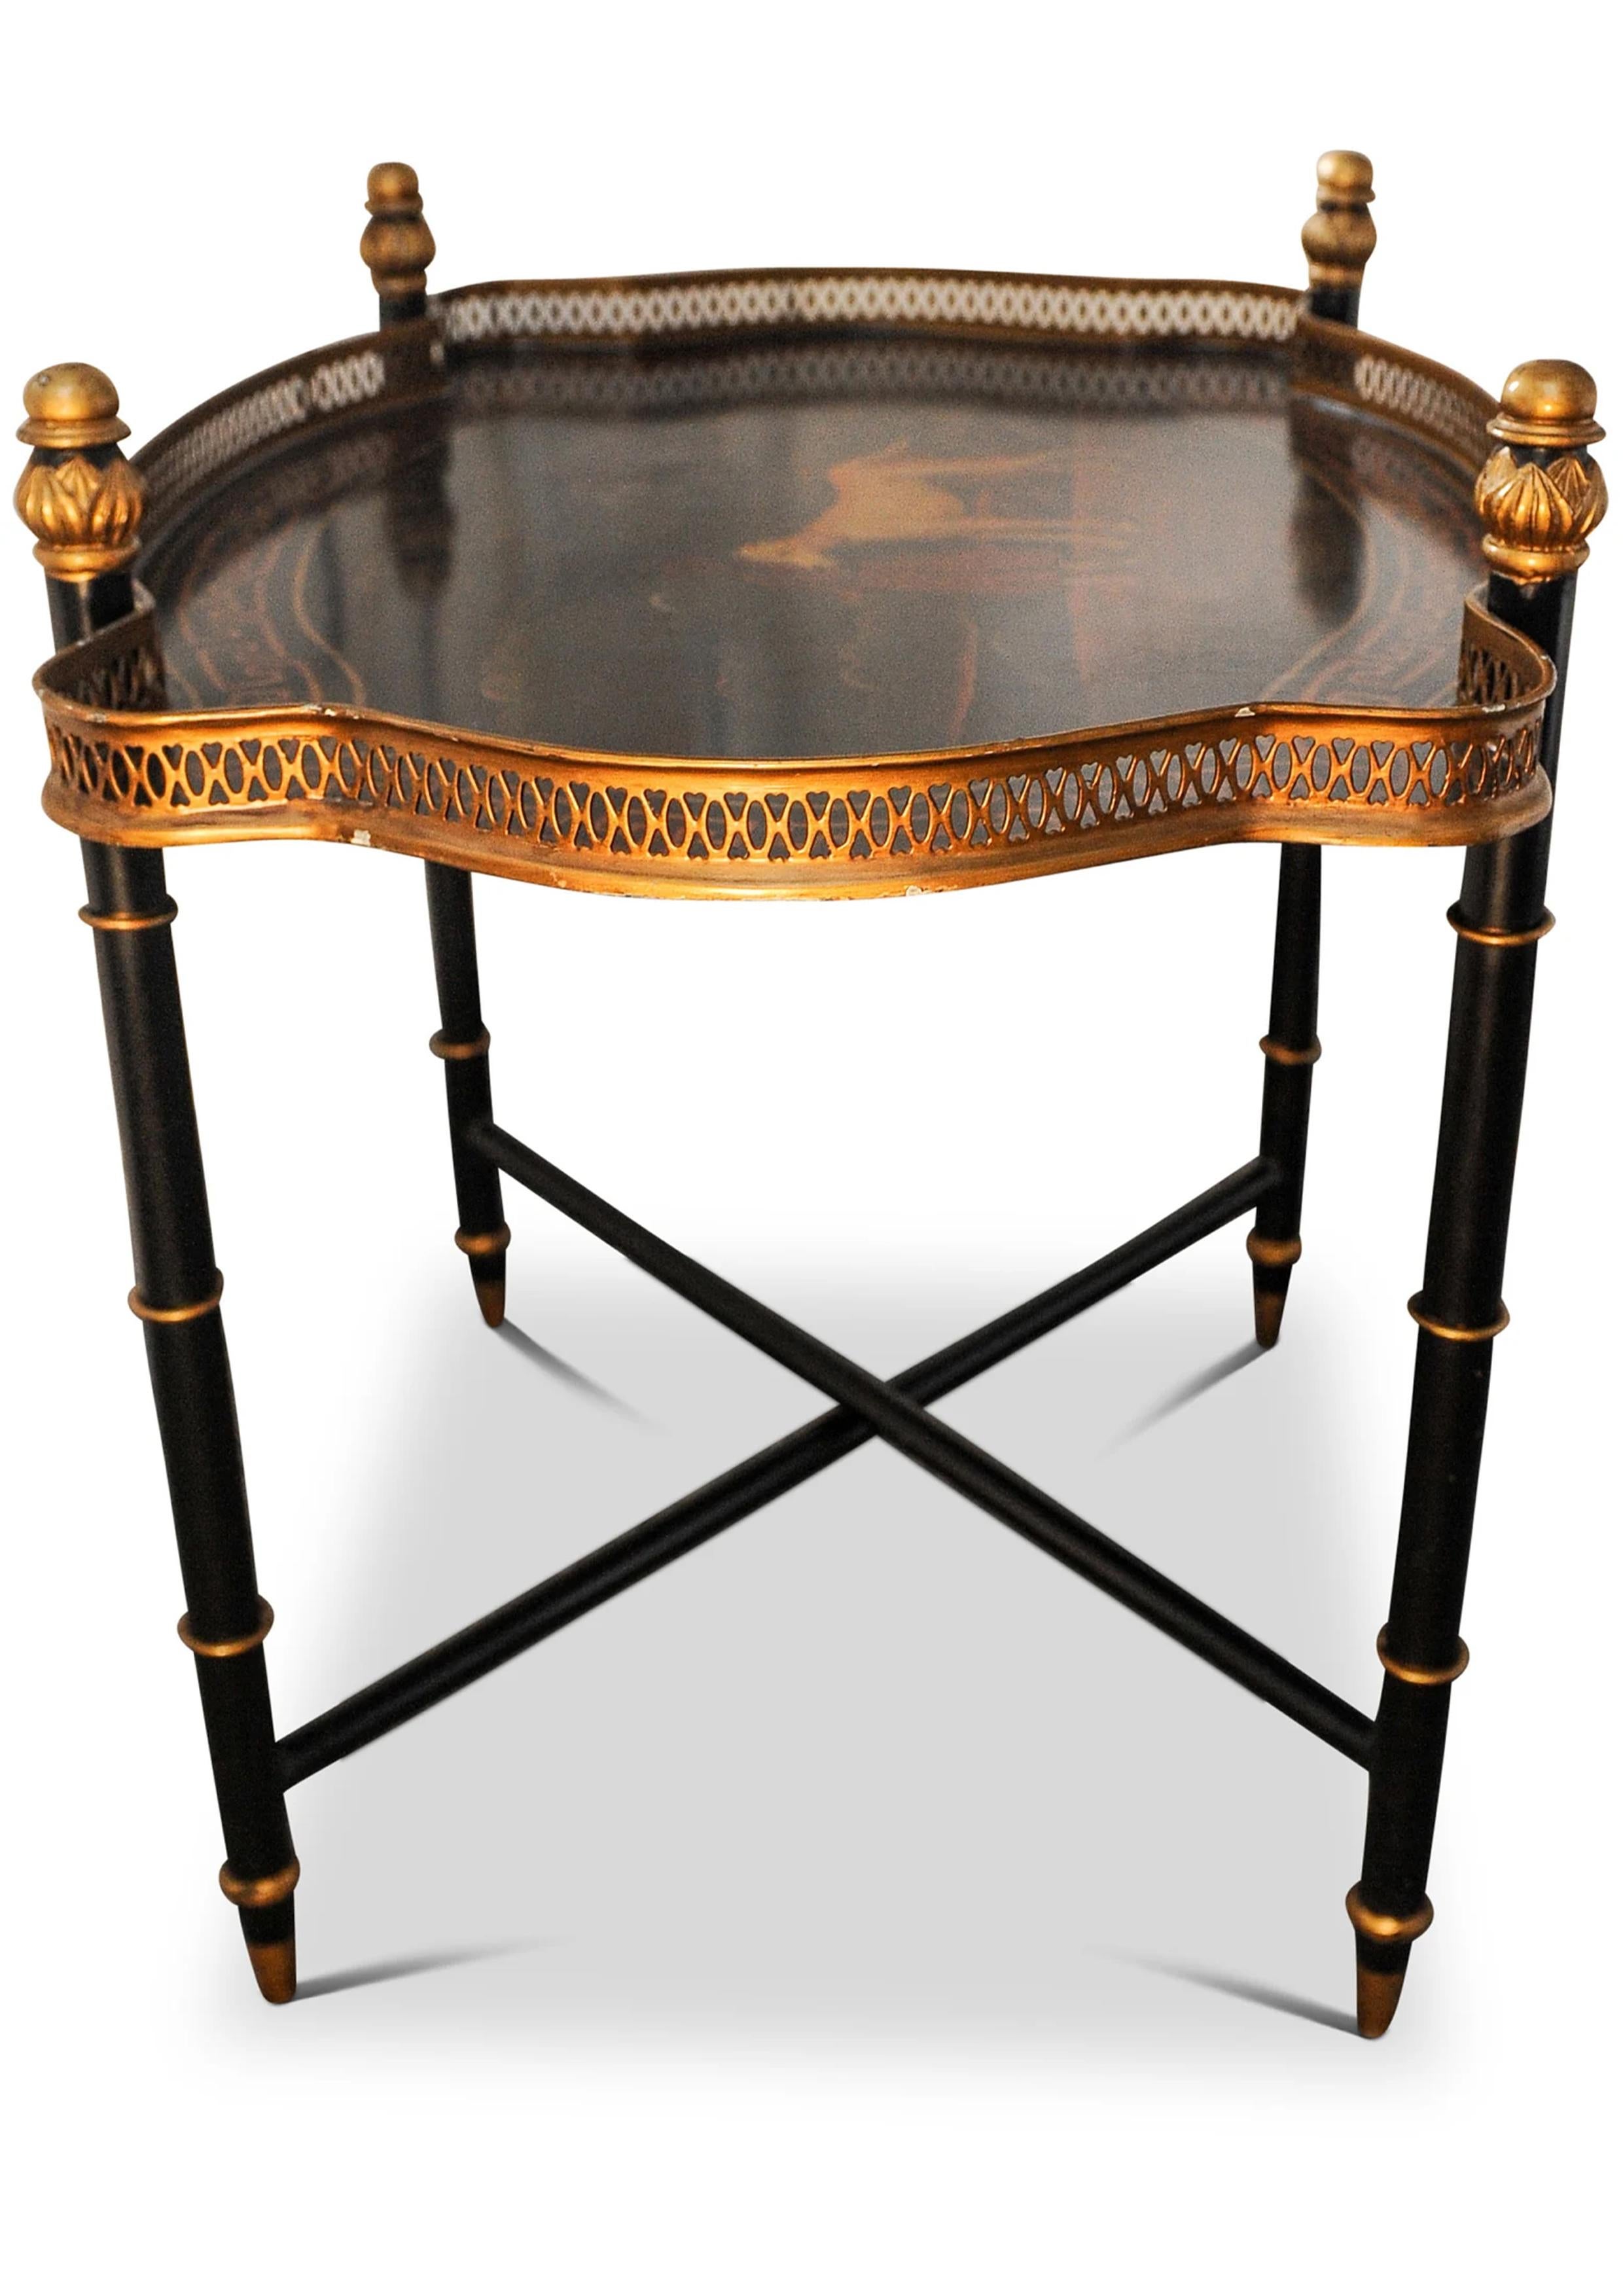 Victorian Regency Style Tole Peinte & Gilt Drinks Tray On X Frame Ebonised Stand For Sale